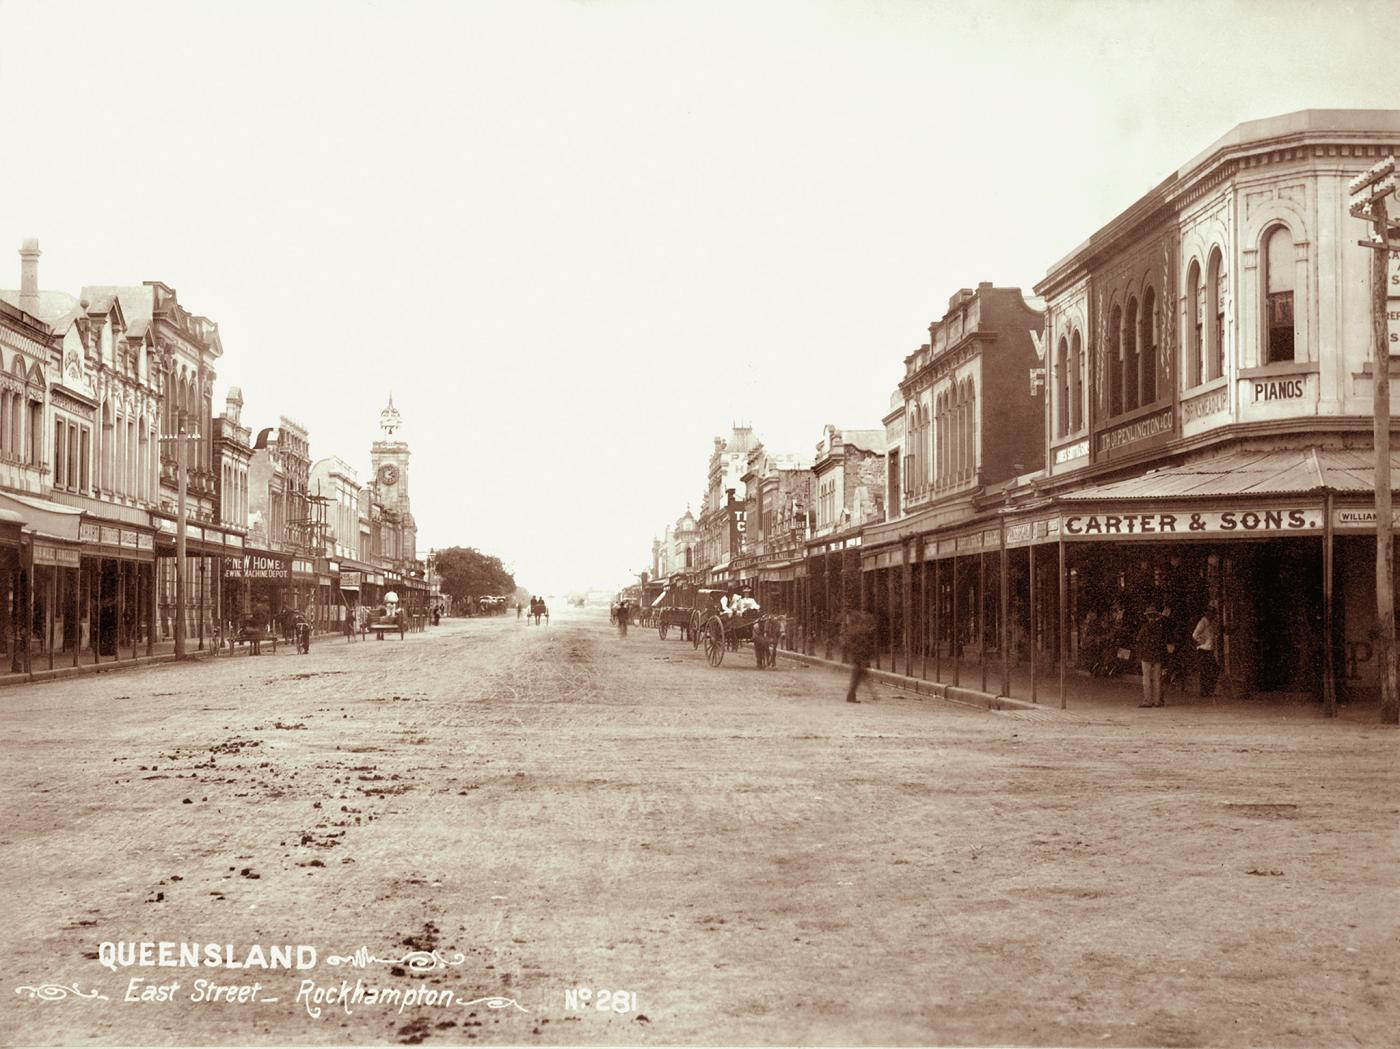 View of East Street, Rockhampton showing carts, horses and buildings.